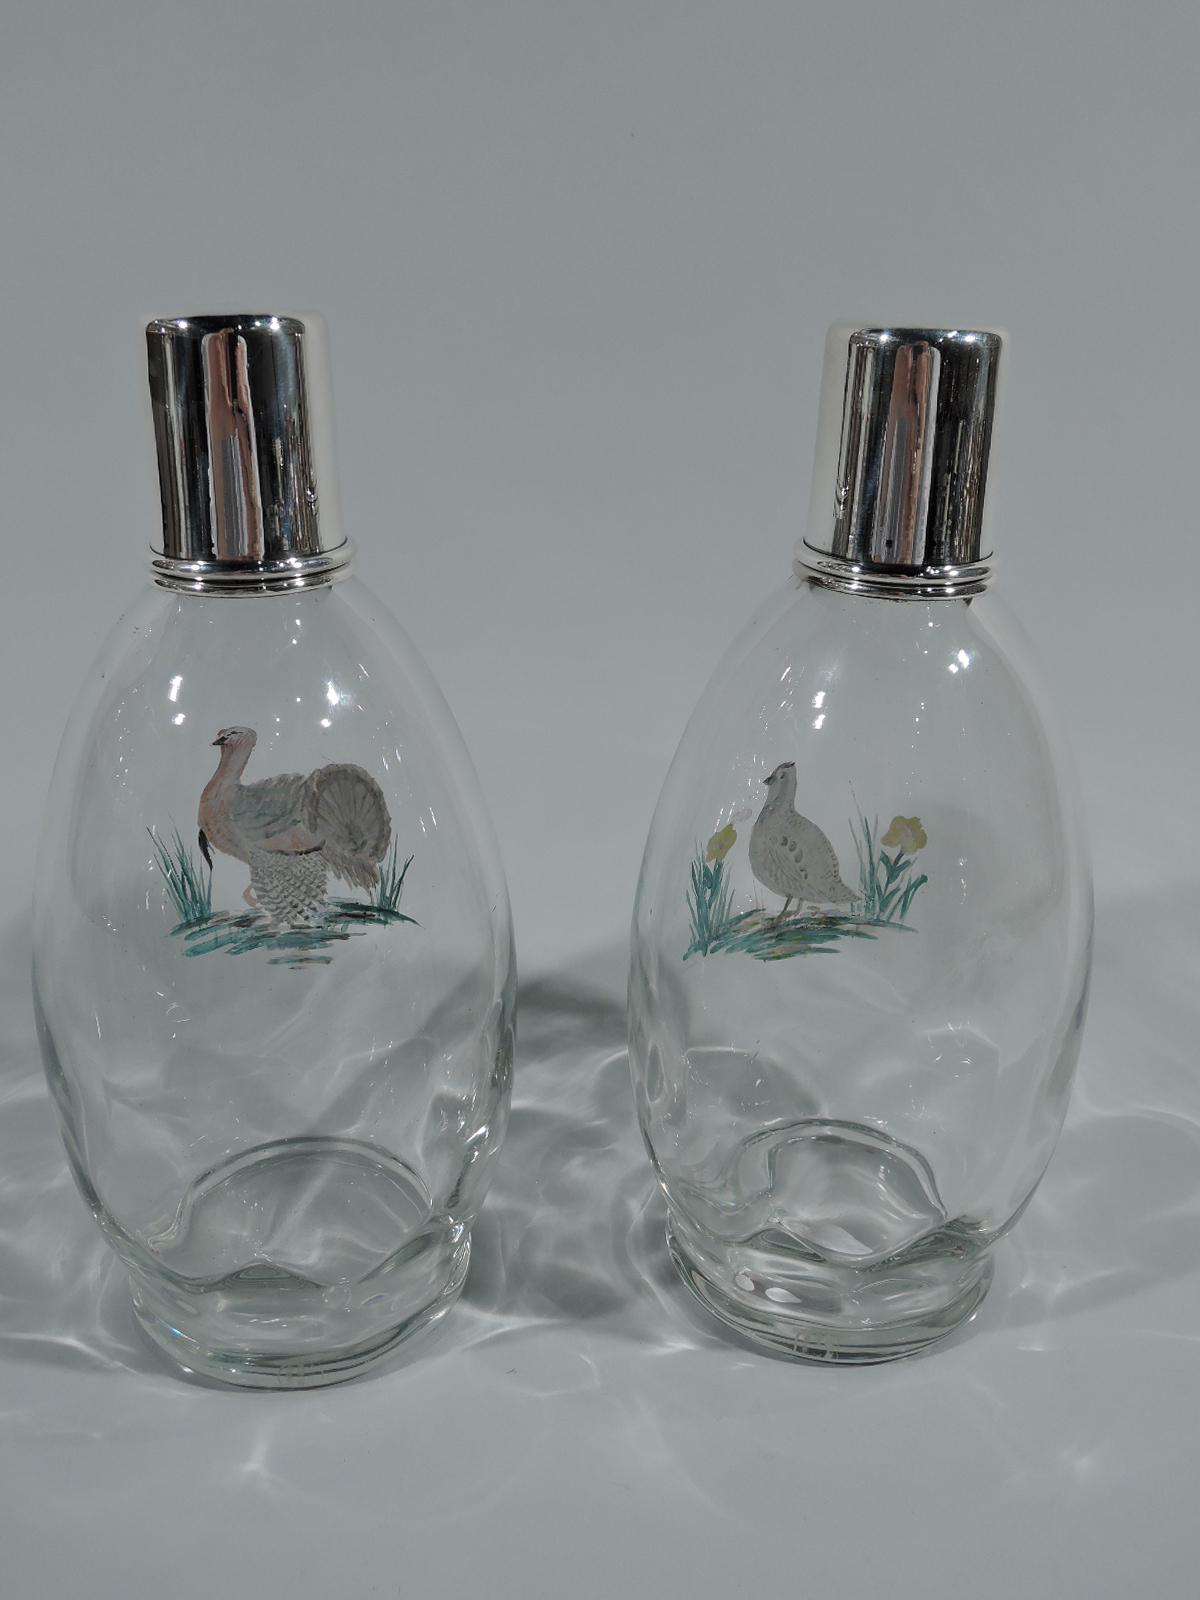 Pair of sterling silver and enameled glass decanters. Made by Hawkes in Corning, ca 1920. Each: Ovoid bottle with interior faceting, straight neck in sterling silver collar, and cylindrical cover (also sterling silver). Pontil mark. Clear glass with